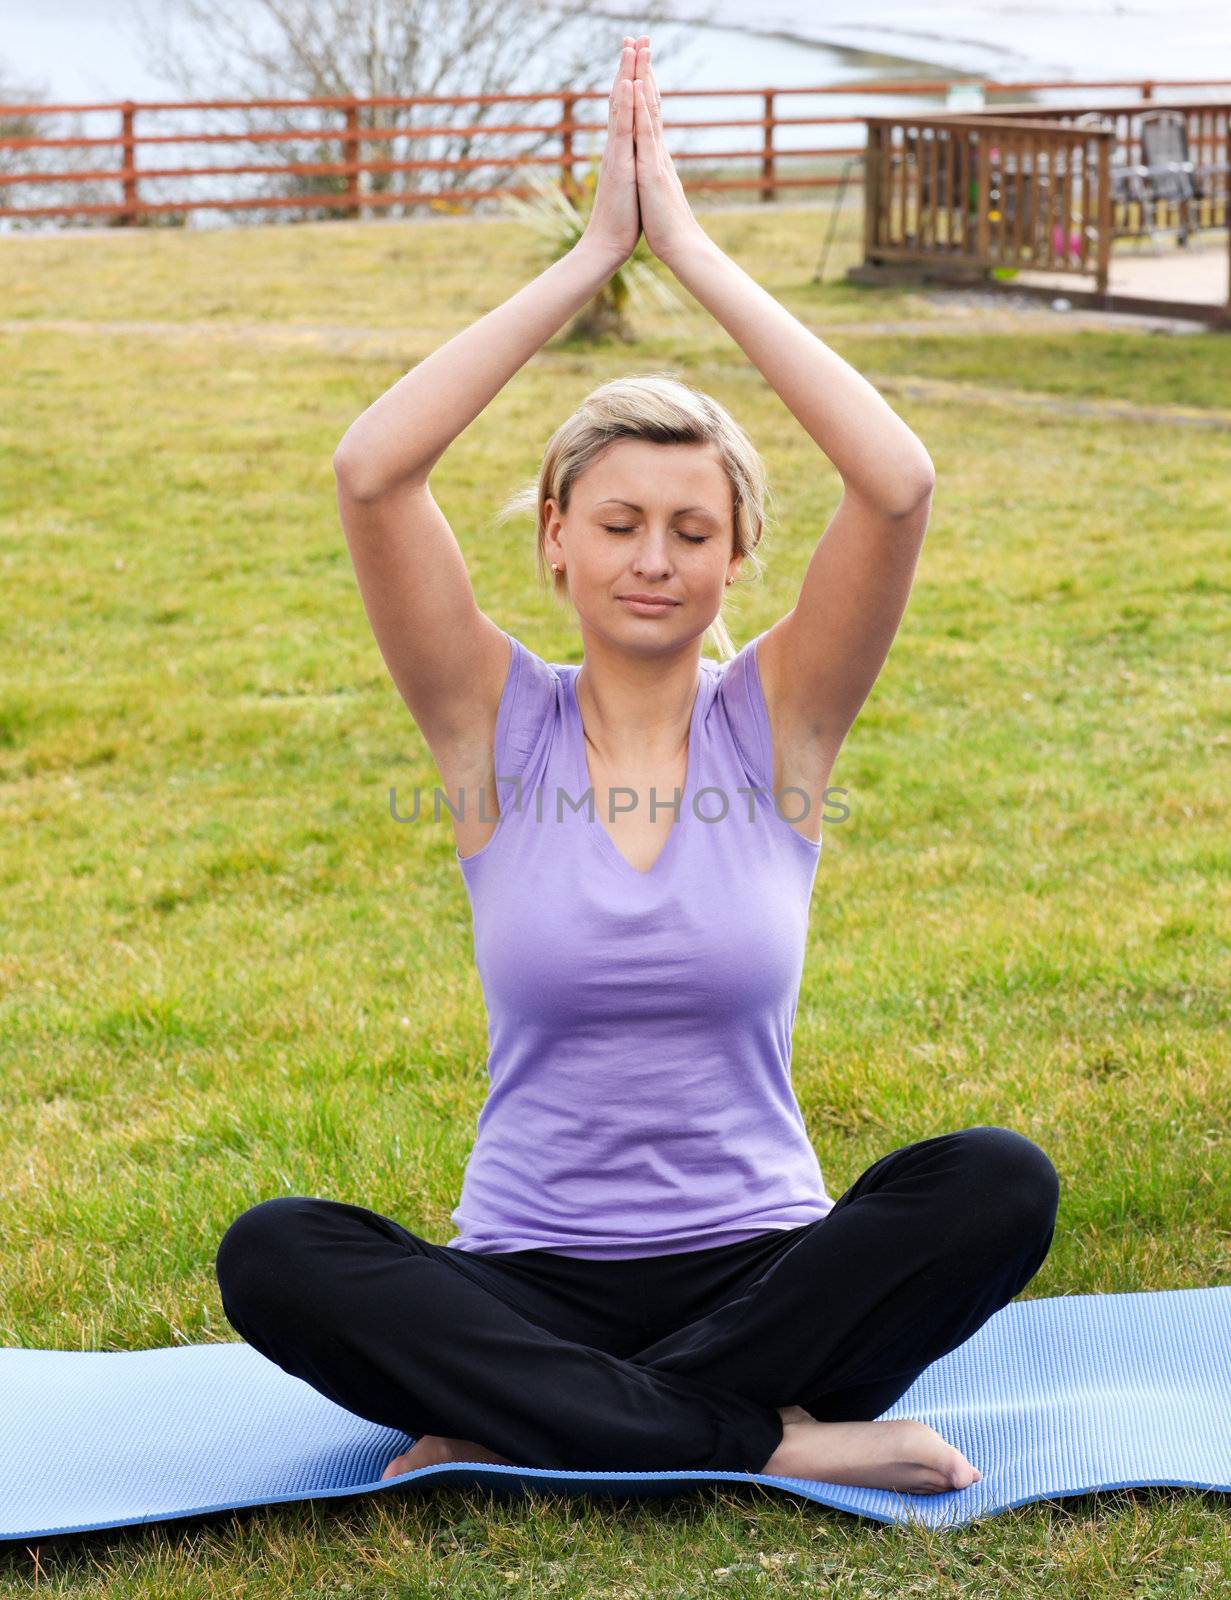 Relaxed woman doing yoga sitting on the grass in a park